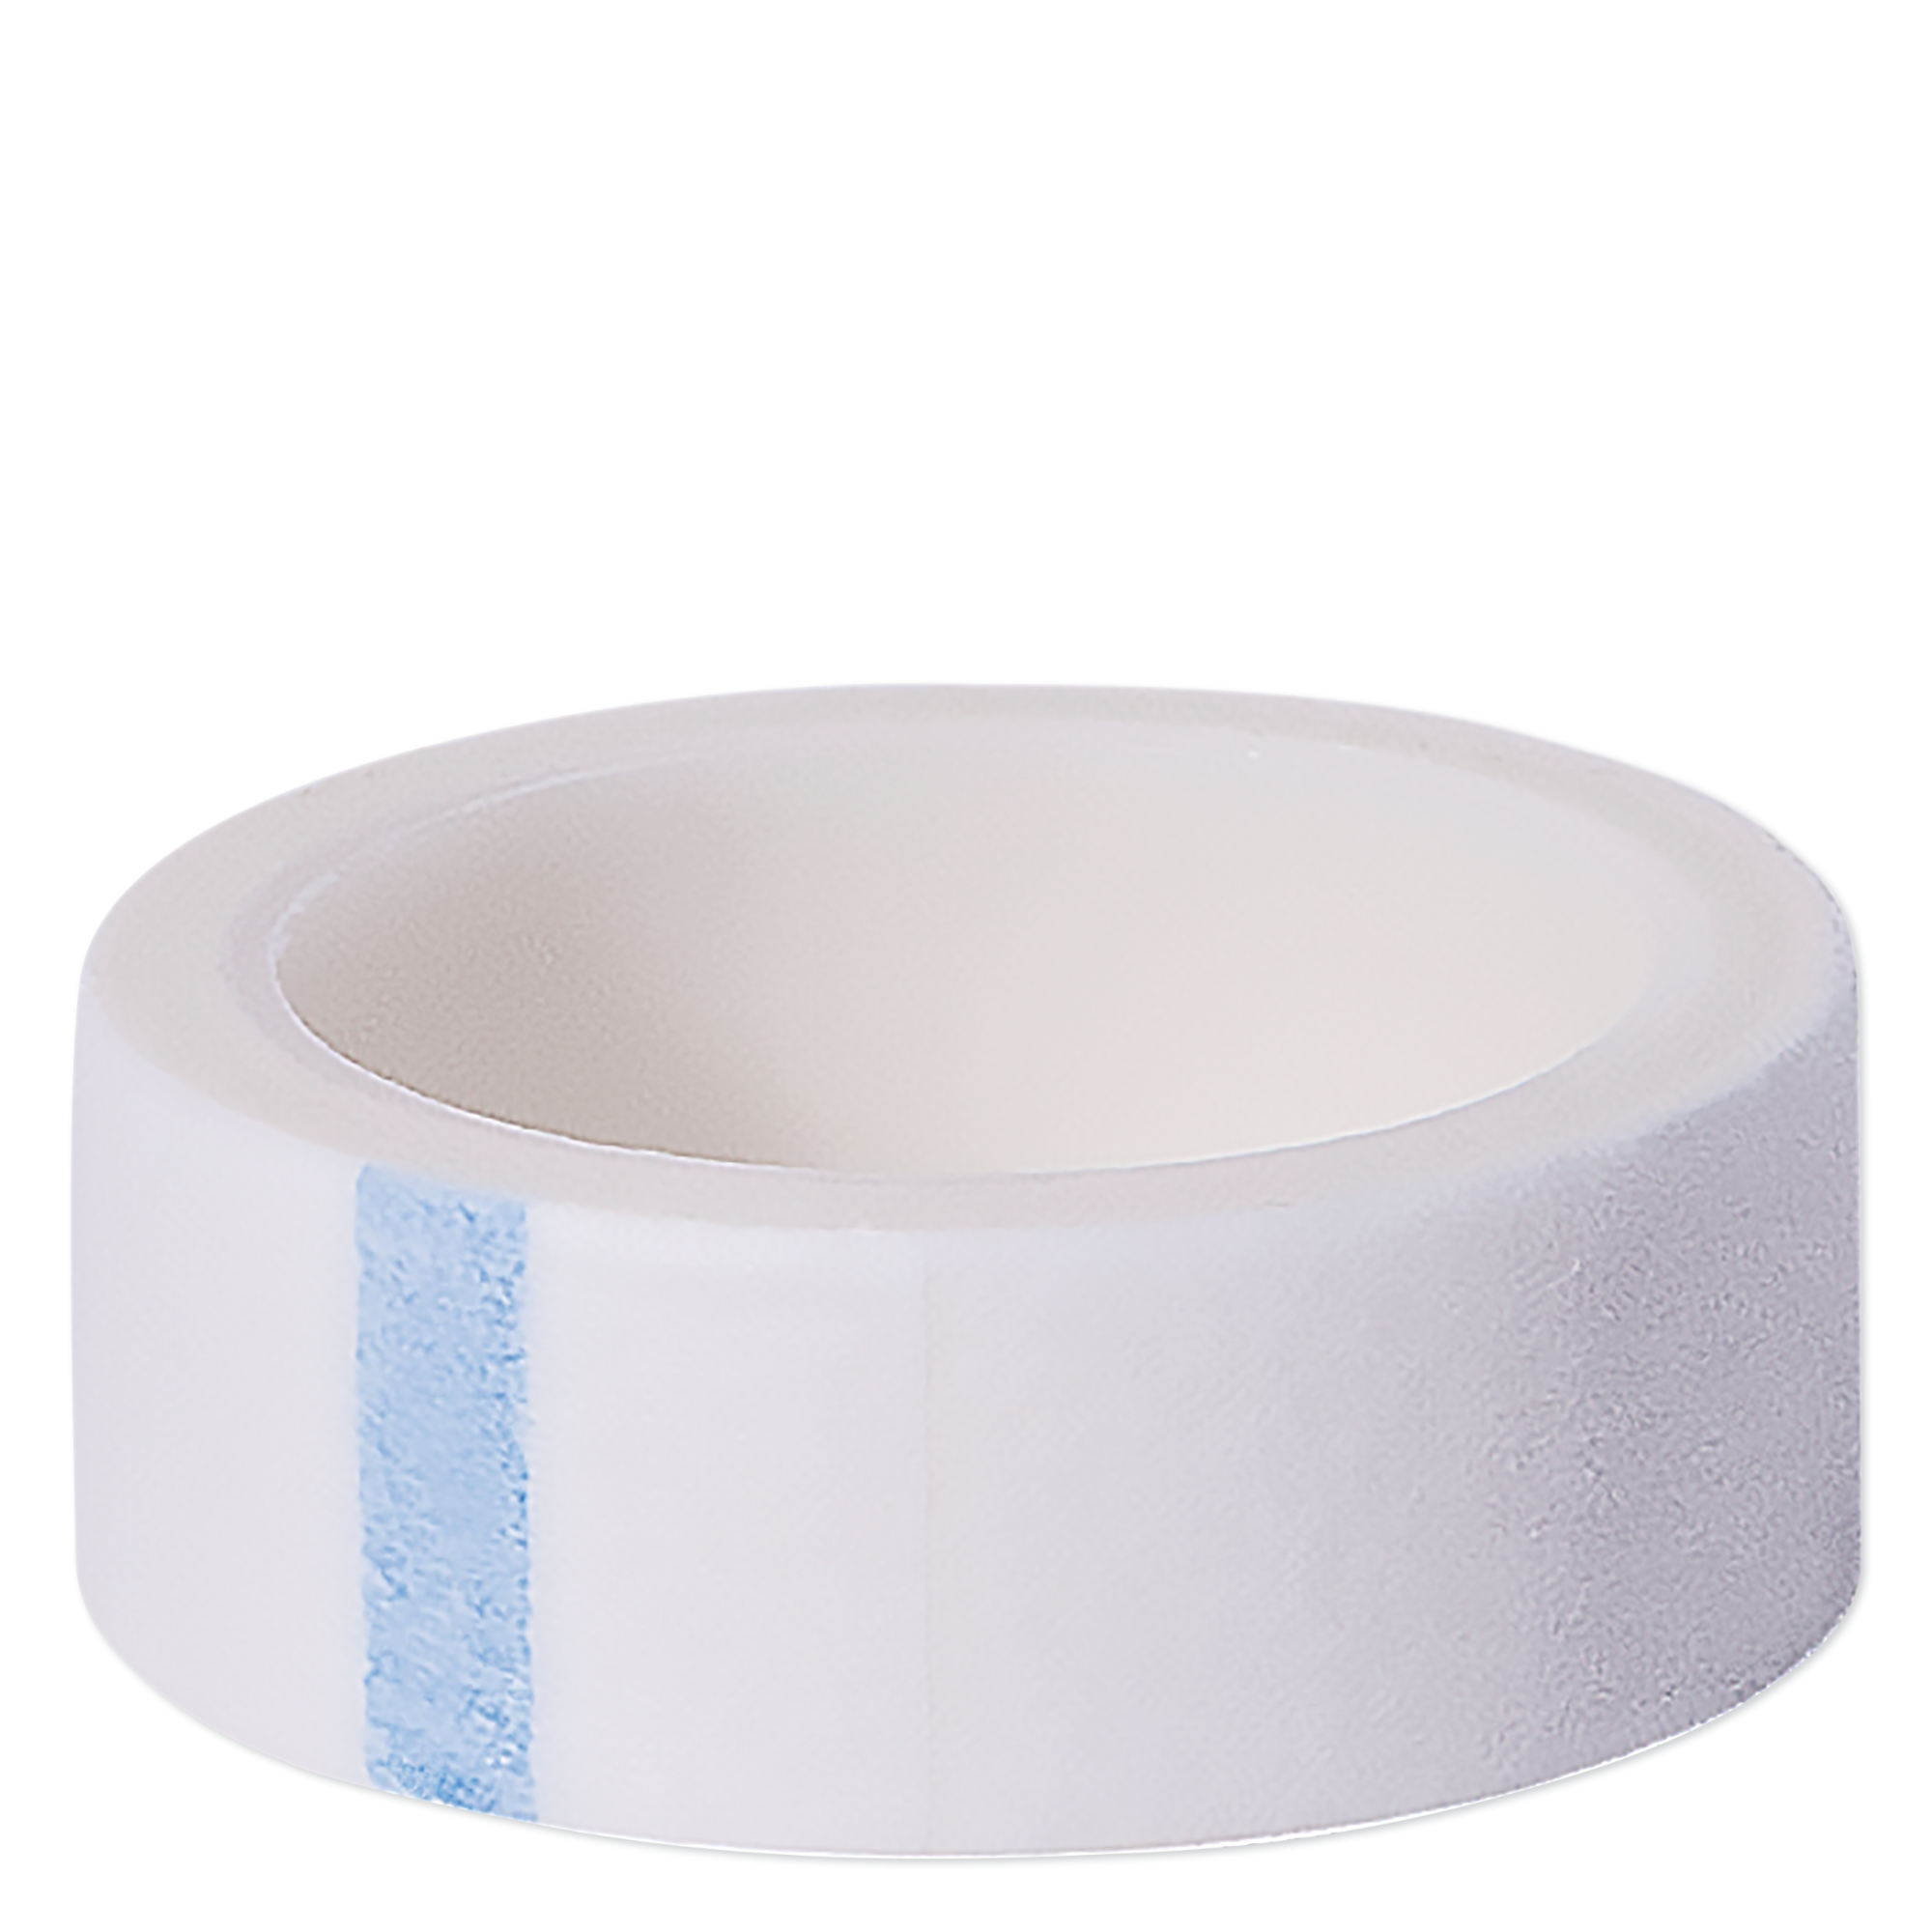 Non-Woven Medical Tape - box of 24 rolls